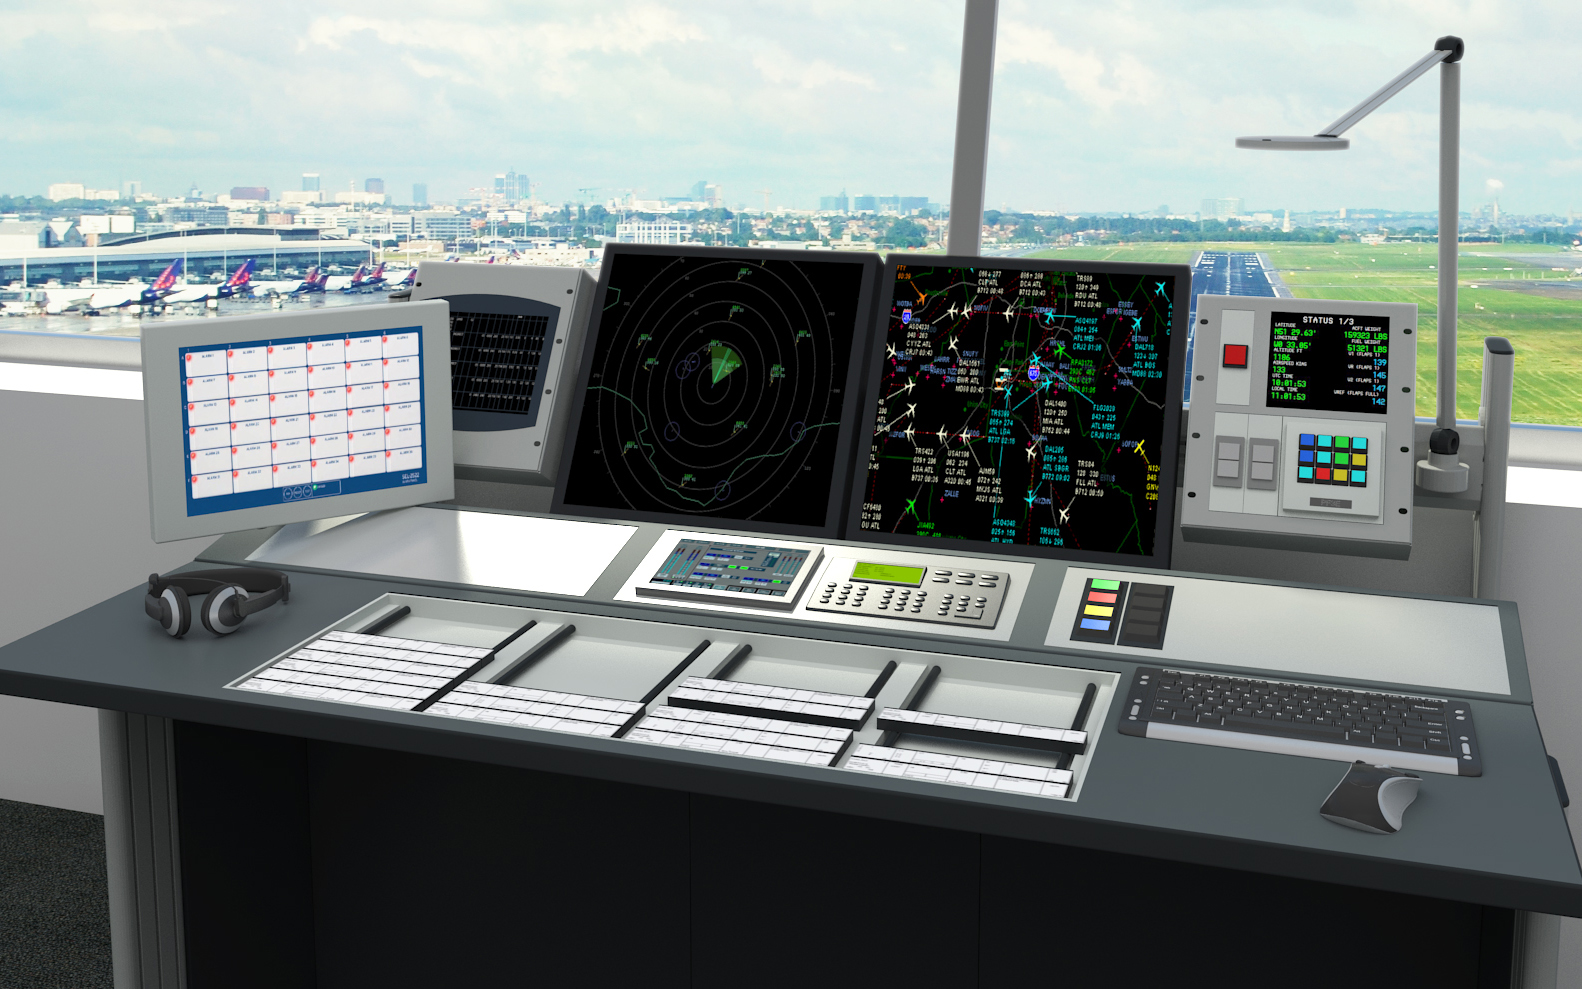 Dacobas workstation in air traffic control room